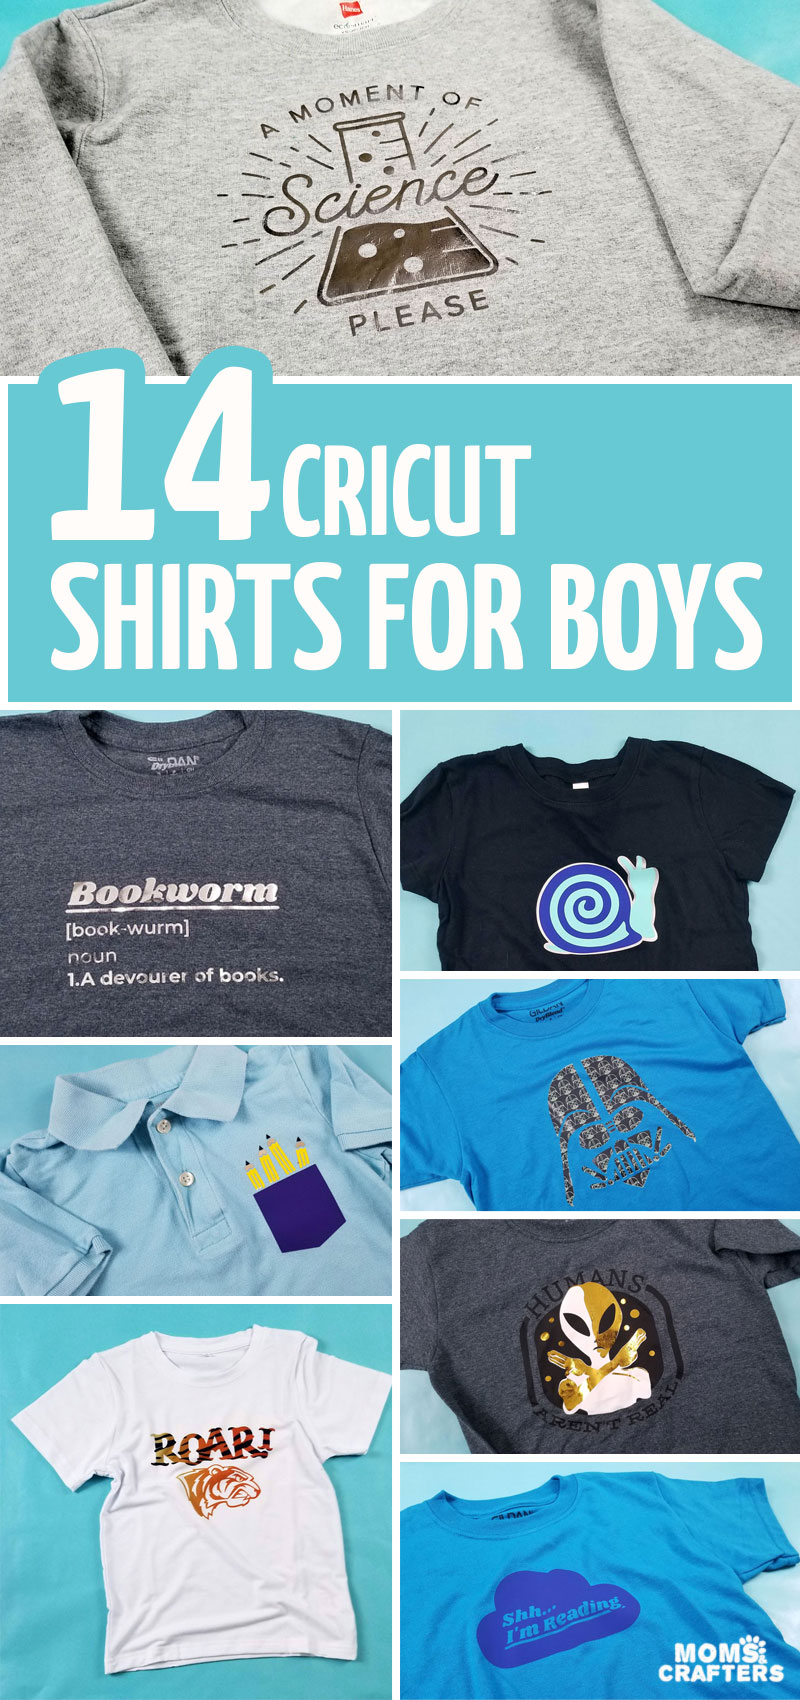 Cricut Shirt Ideas for Boys - 14 Unique T-shirts to Make with HTV